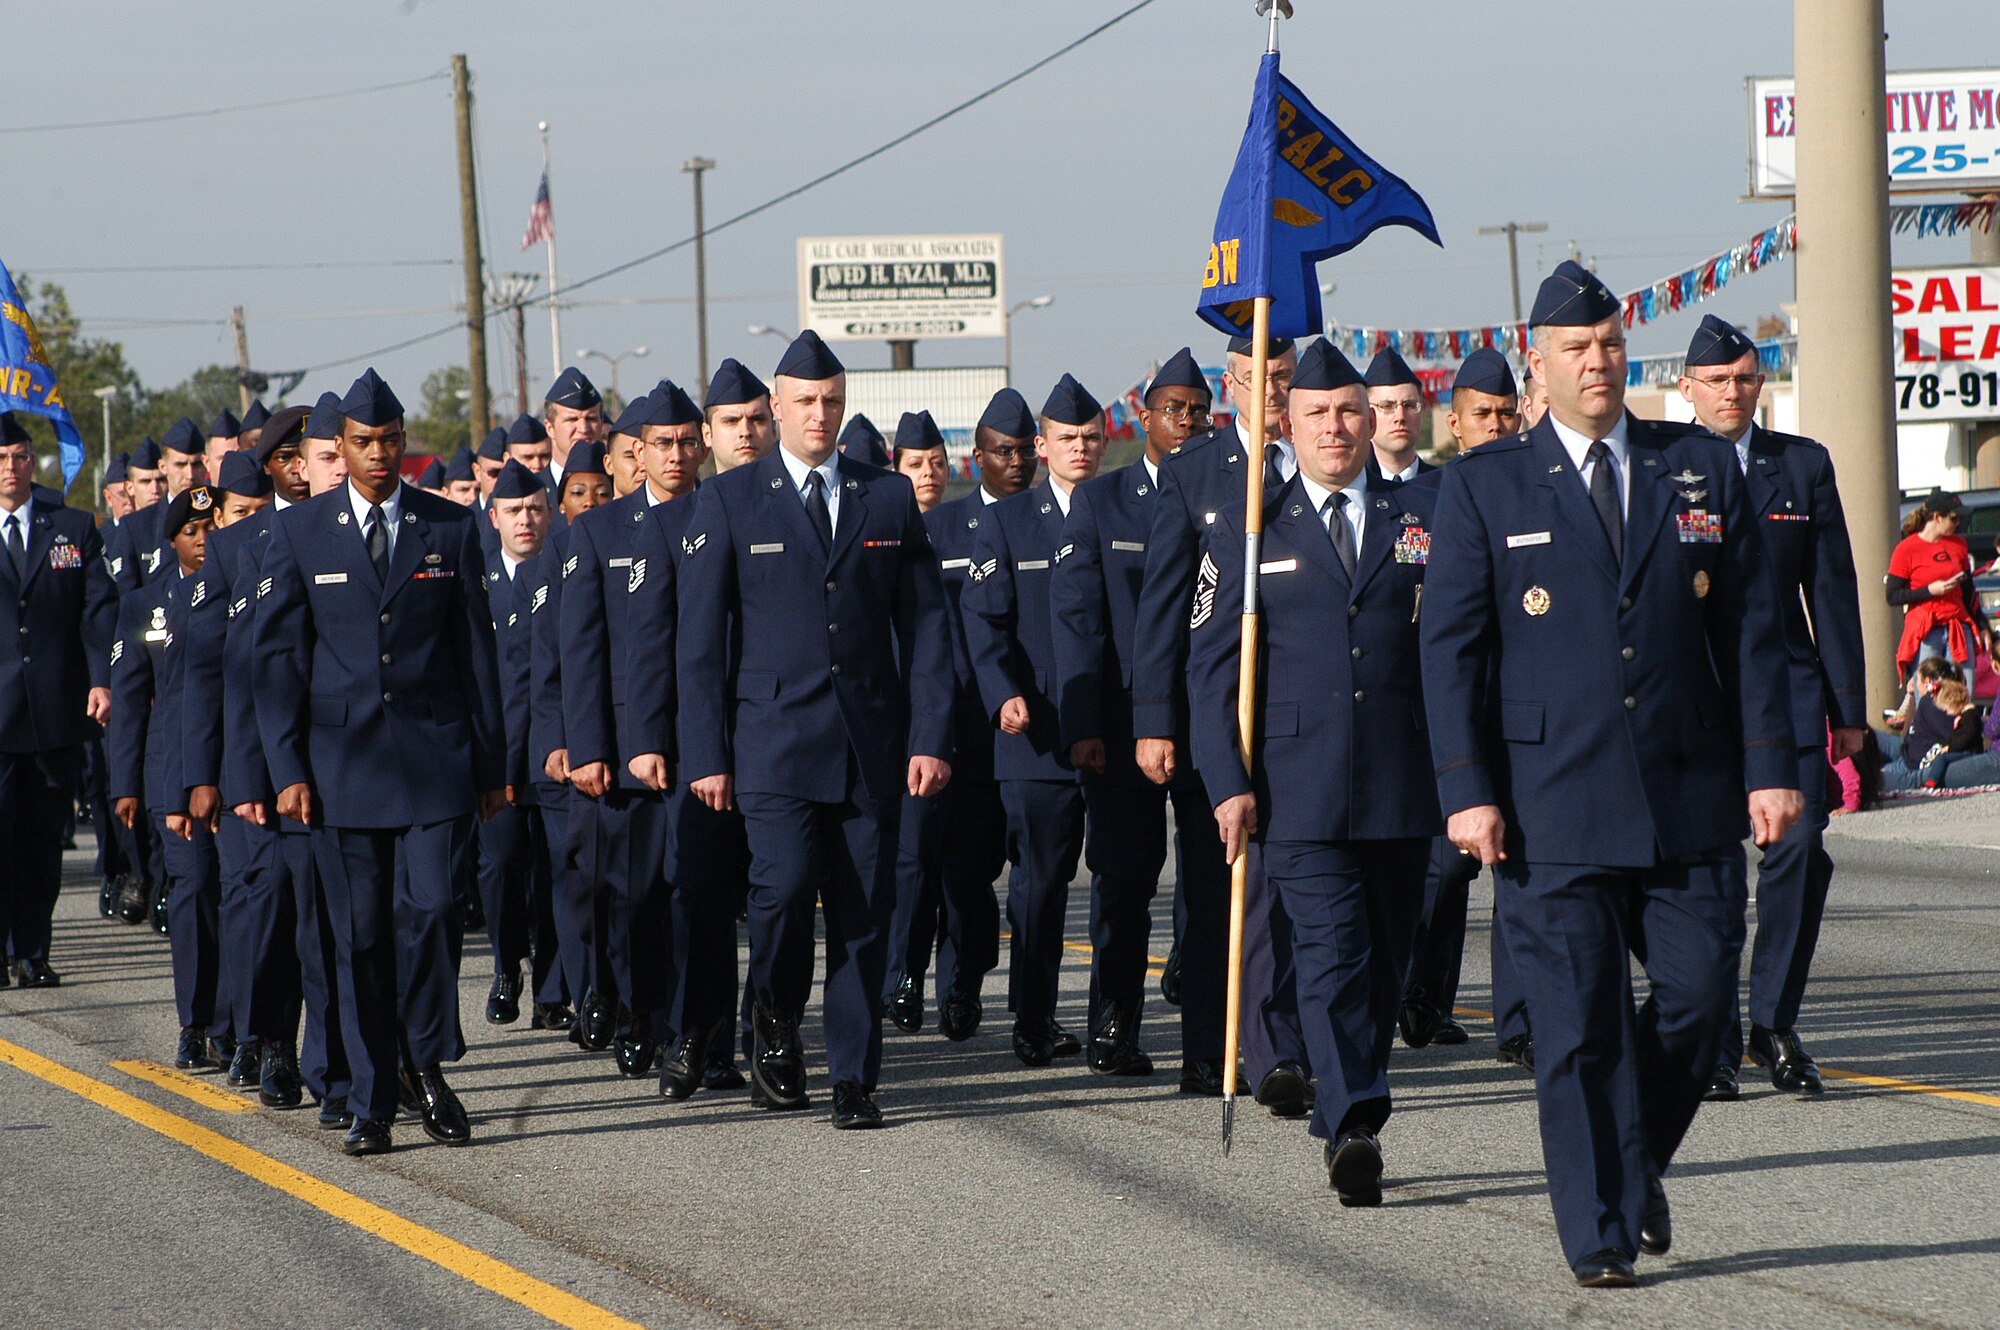 Col. Mitch Butikofer, 78th Air Base Wing commander, front,  and Chief Master Sgt. Patrick Bowen, installation command chief, with guidon, leads a formation of Airmen in the 2012 Warner Robins Christmas Parade  (U. S. Air Force photo/Sue Sapp)